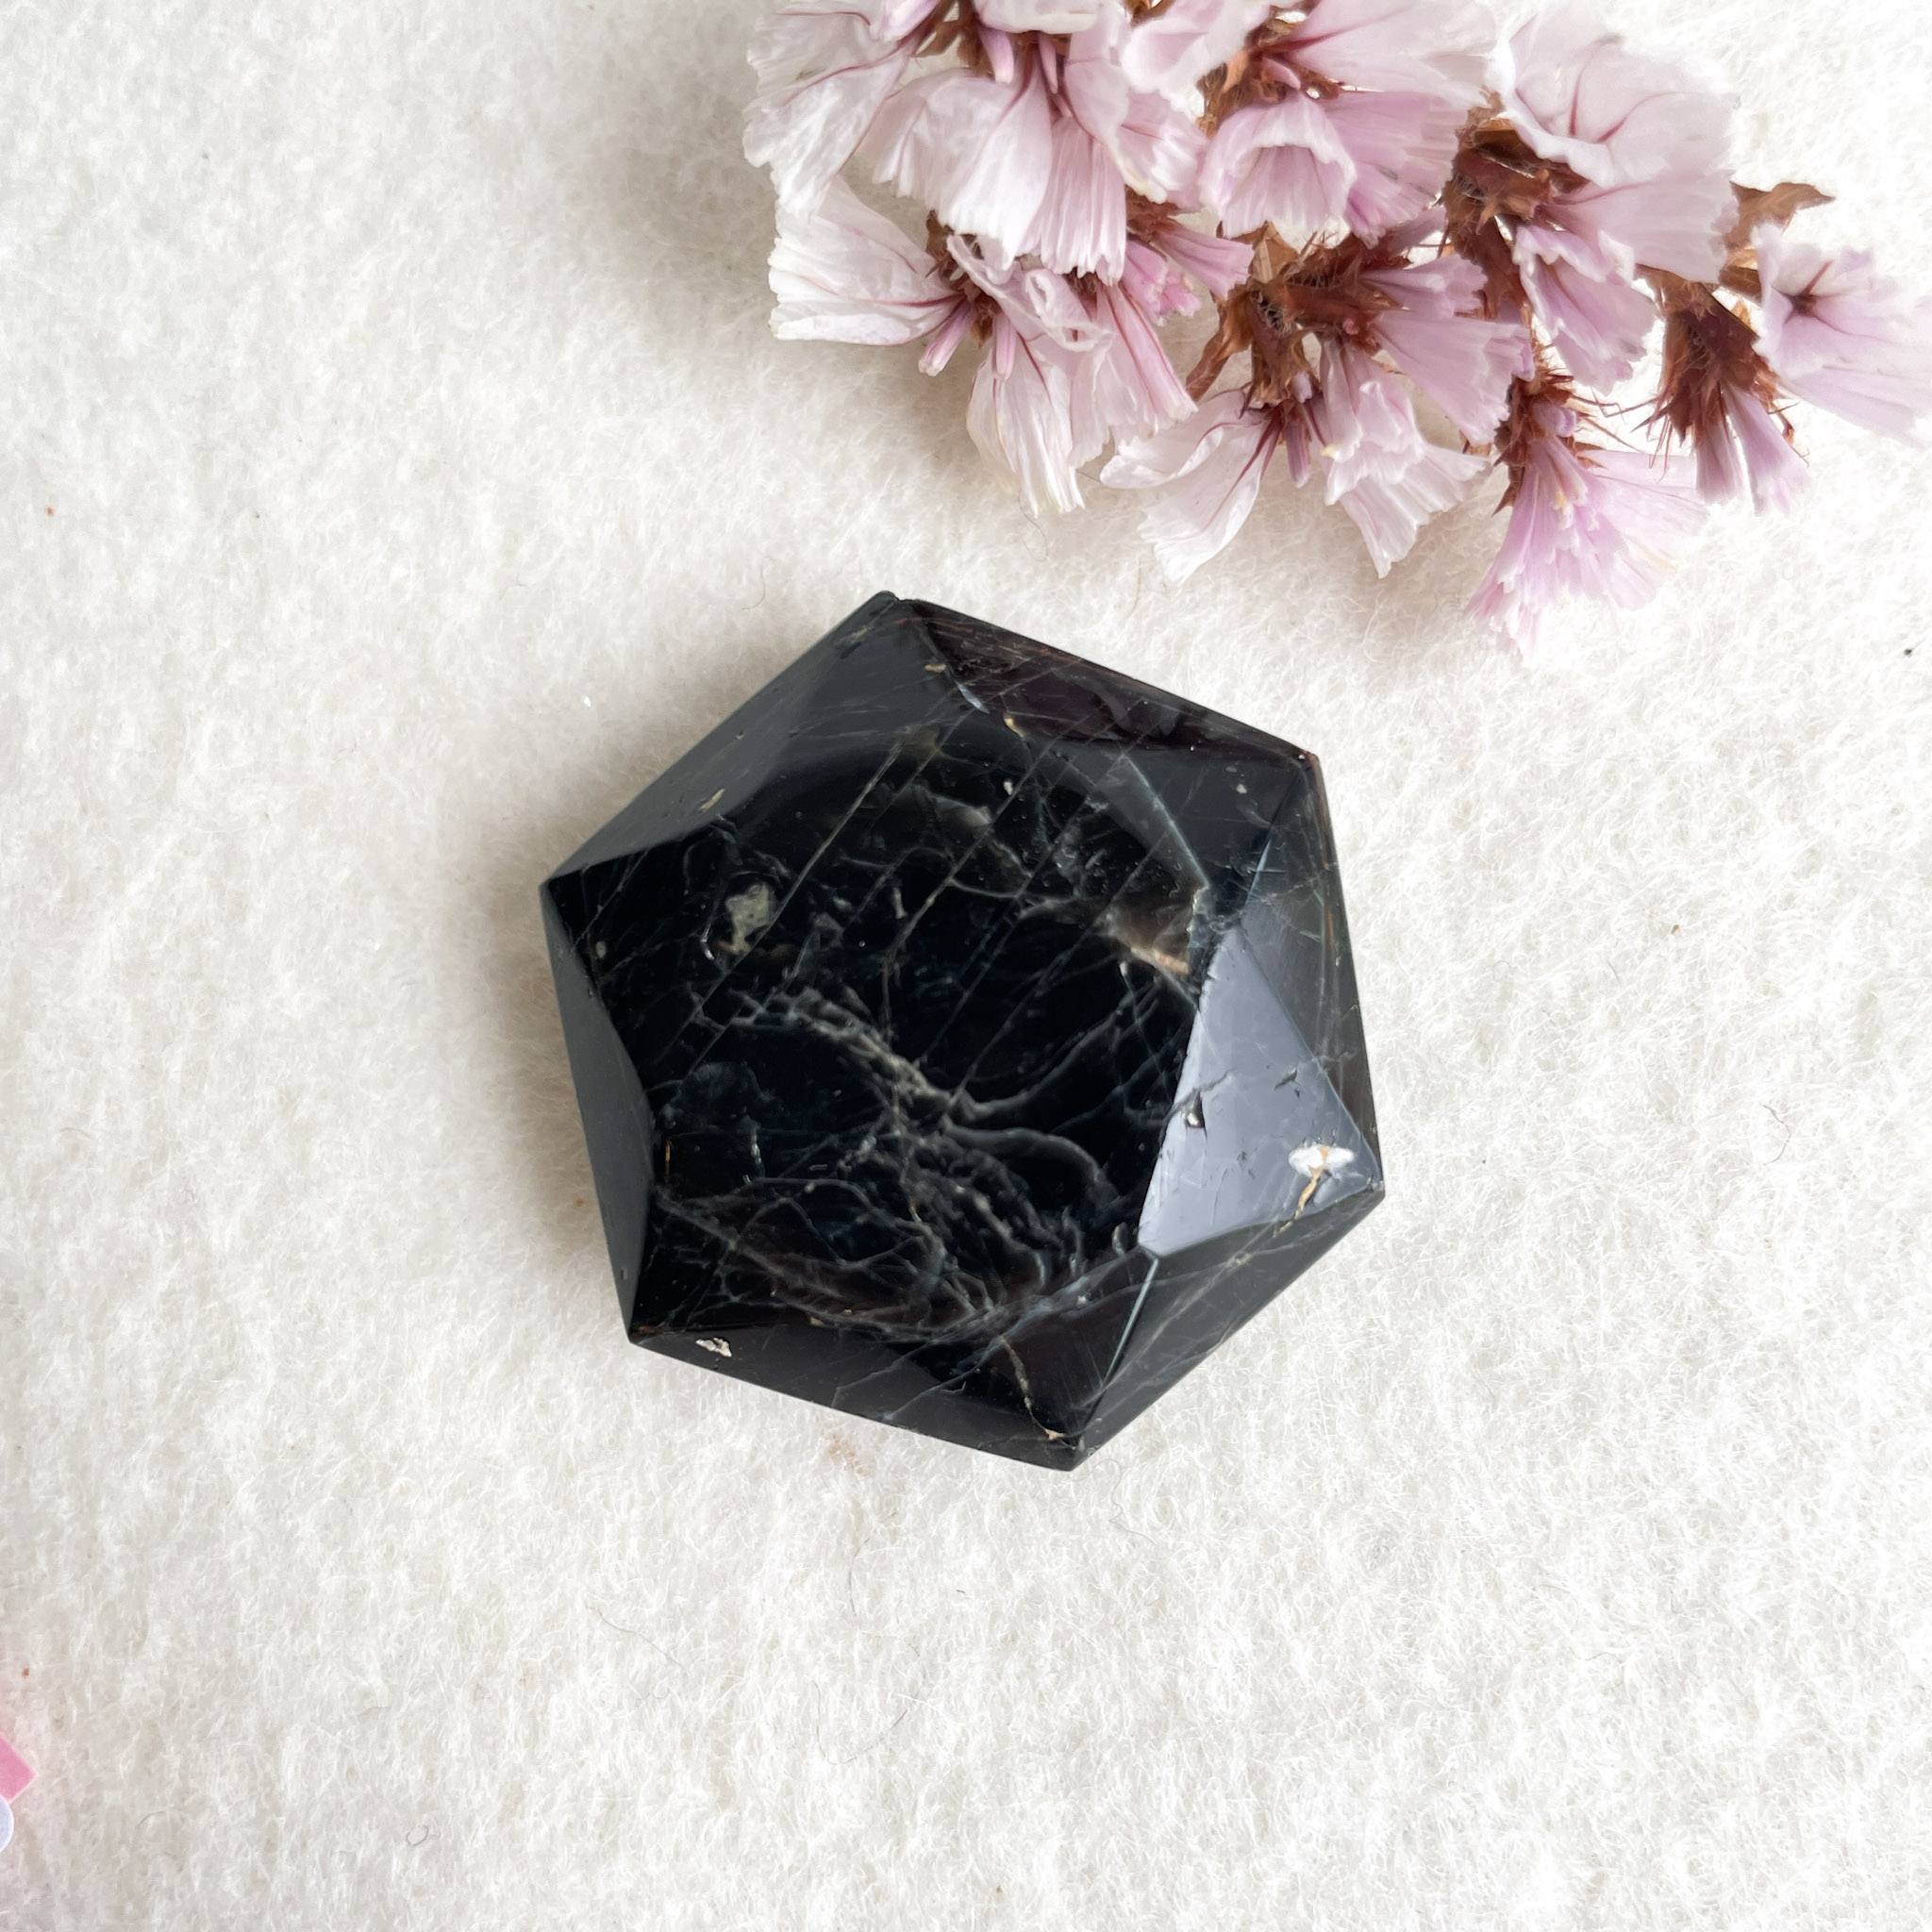 A polished black hexagonal gemstone with visible white veining lies on a textured white surface, accompanied by pink cherry blossom petals nearby.